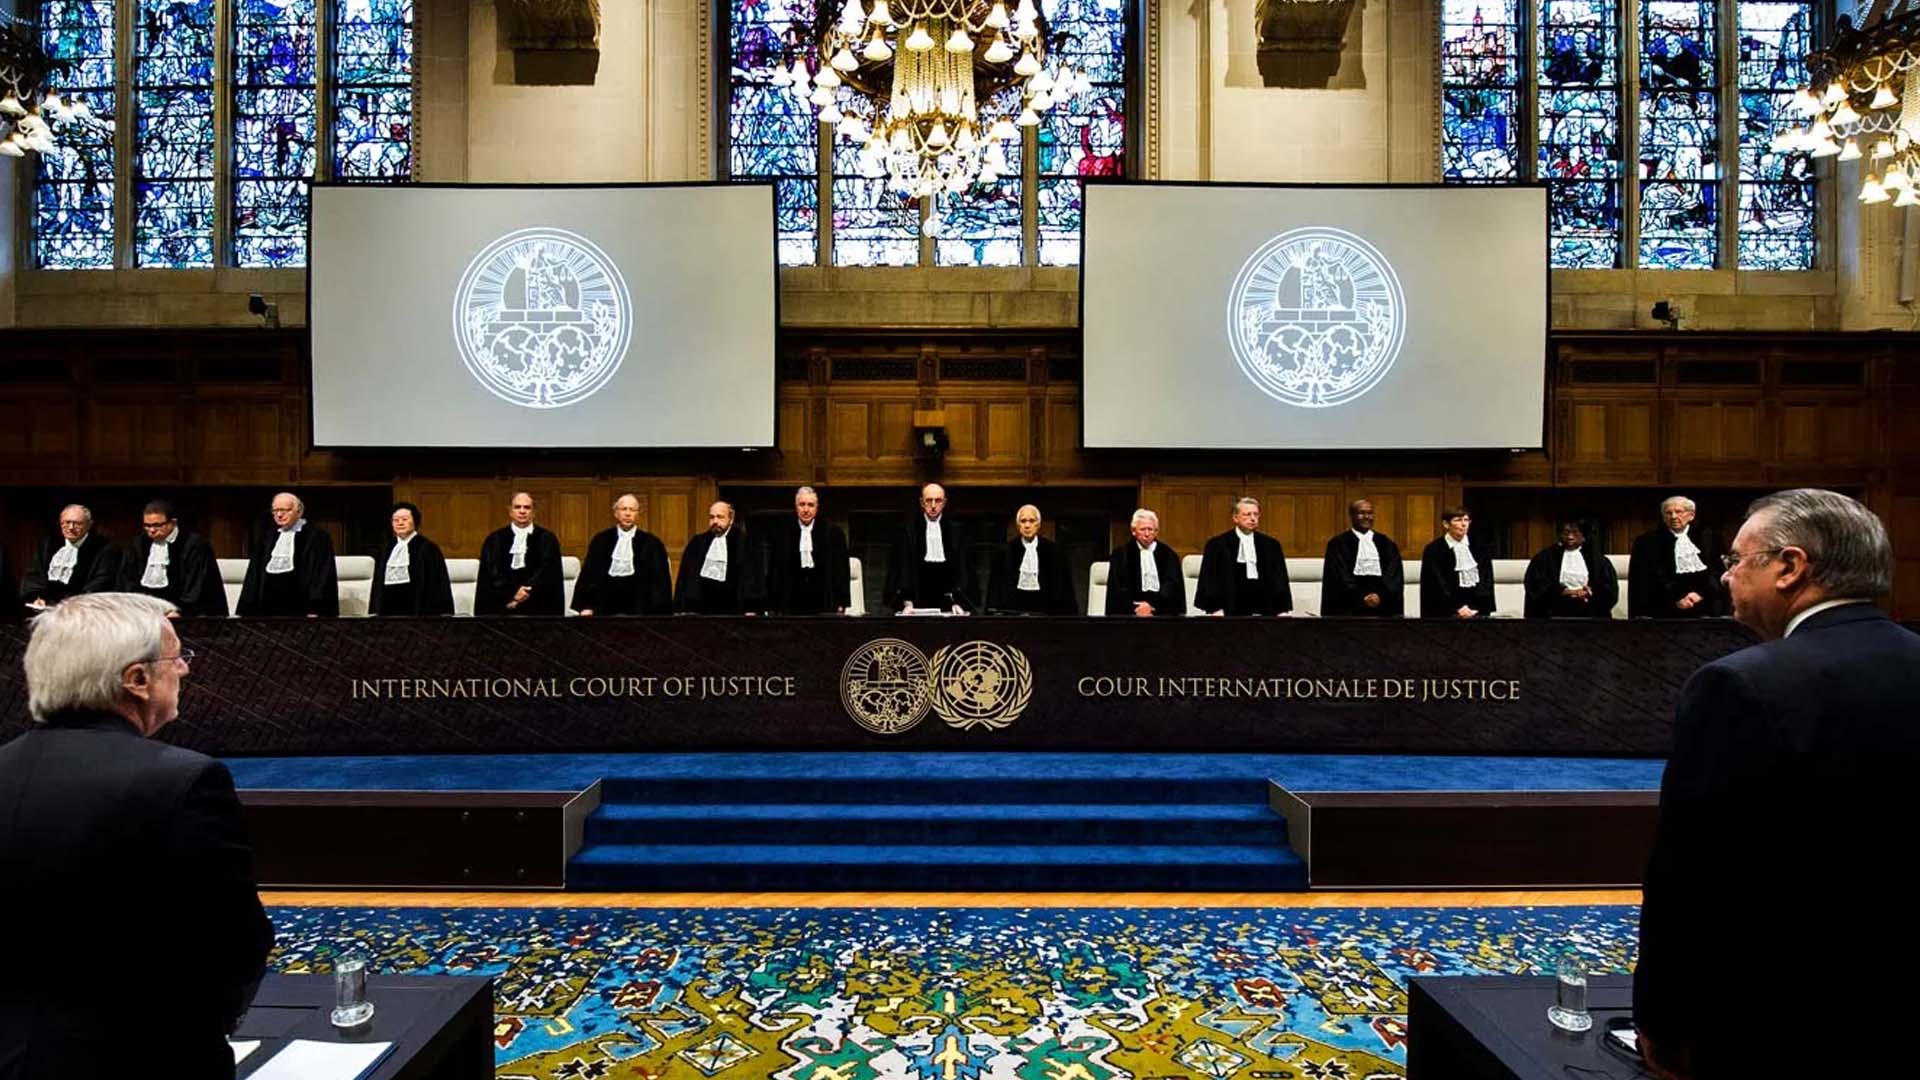 The International Court of Justice (ICJ) delivered its final judgment in determining a maritime boundary between Peru and Chile on 27 January, 2014. Photo: Britannica.